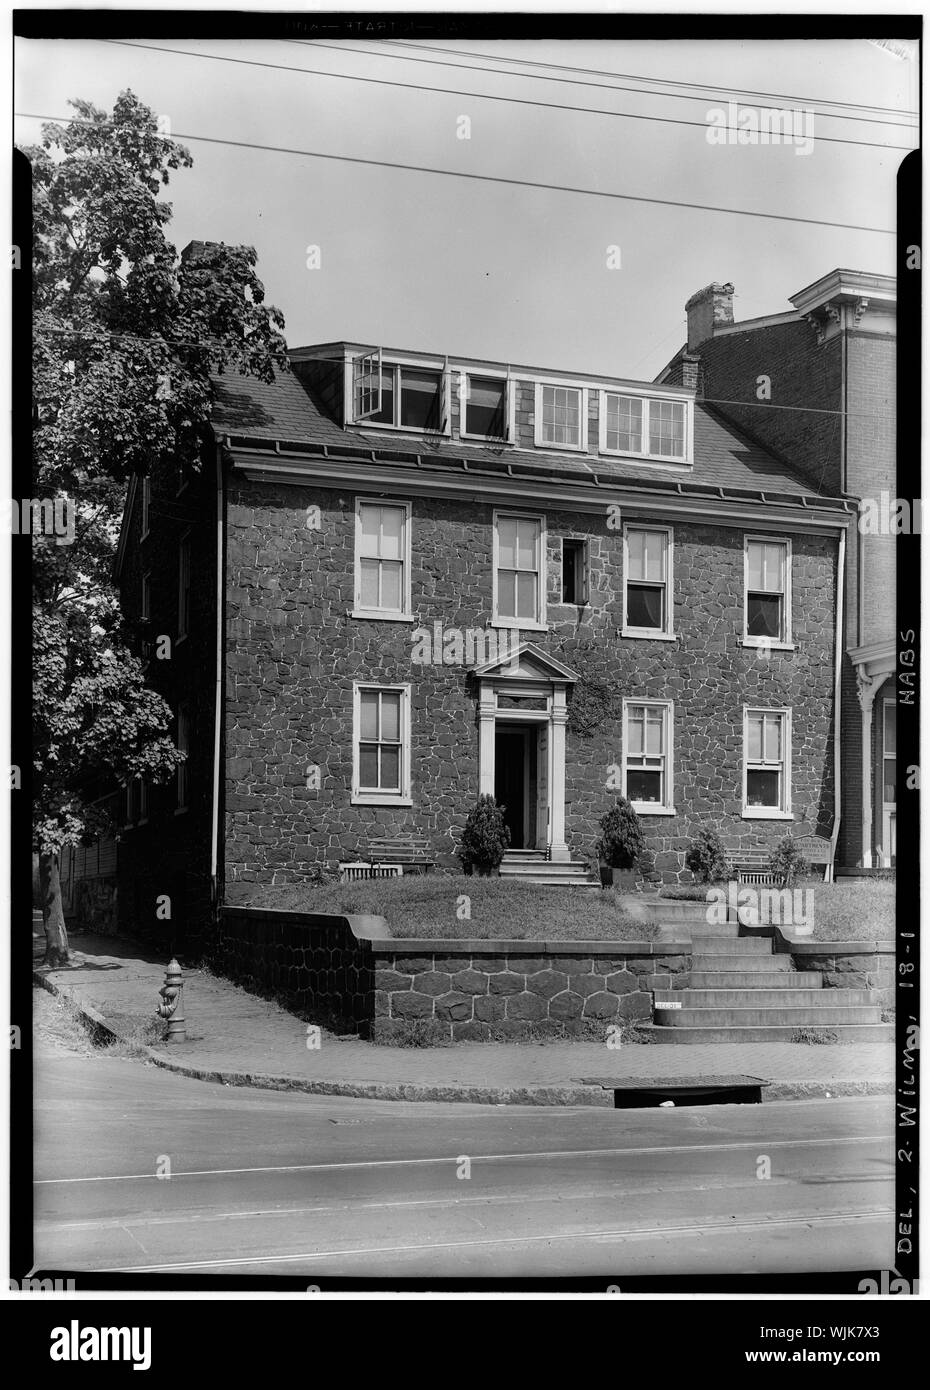 Historic American Buildings Survey W. S. Stewart, Photographer Aug.25, 1936 VIEW FROM SOUTH EAST - William Lea House, 1901 North Market Street, Wilmington, New Castle County, DE Stock Photo